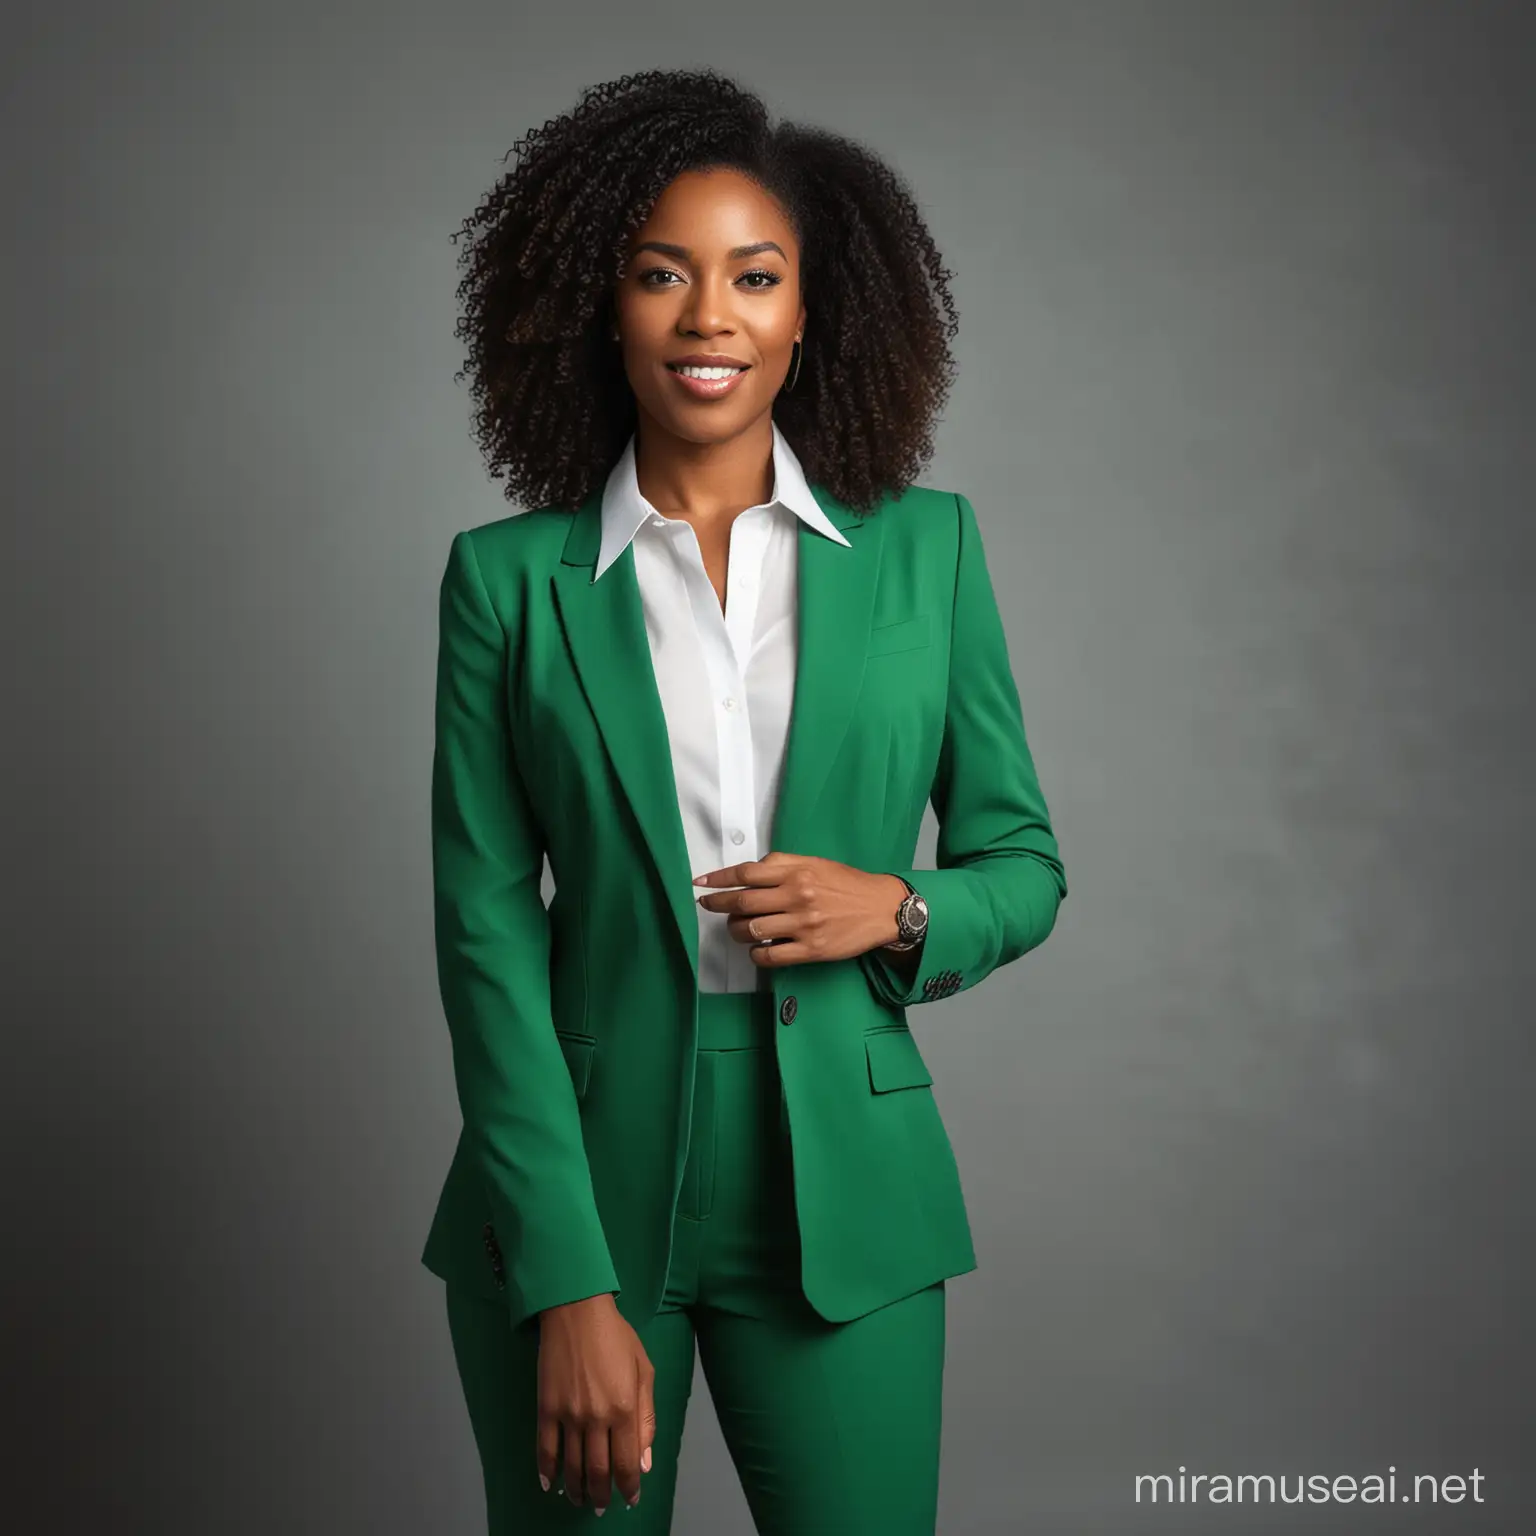 Black professional woman wearing green and white 